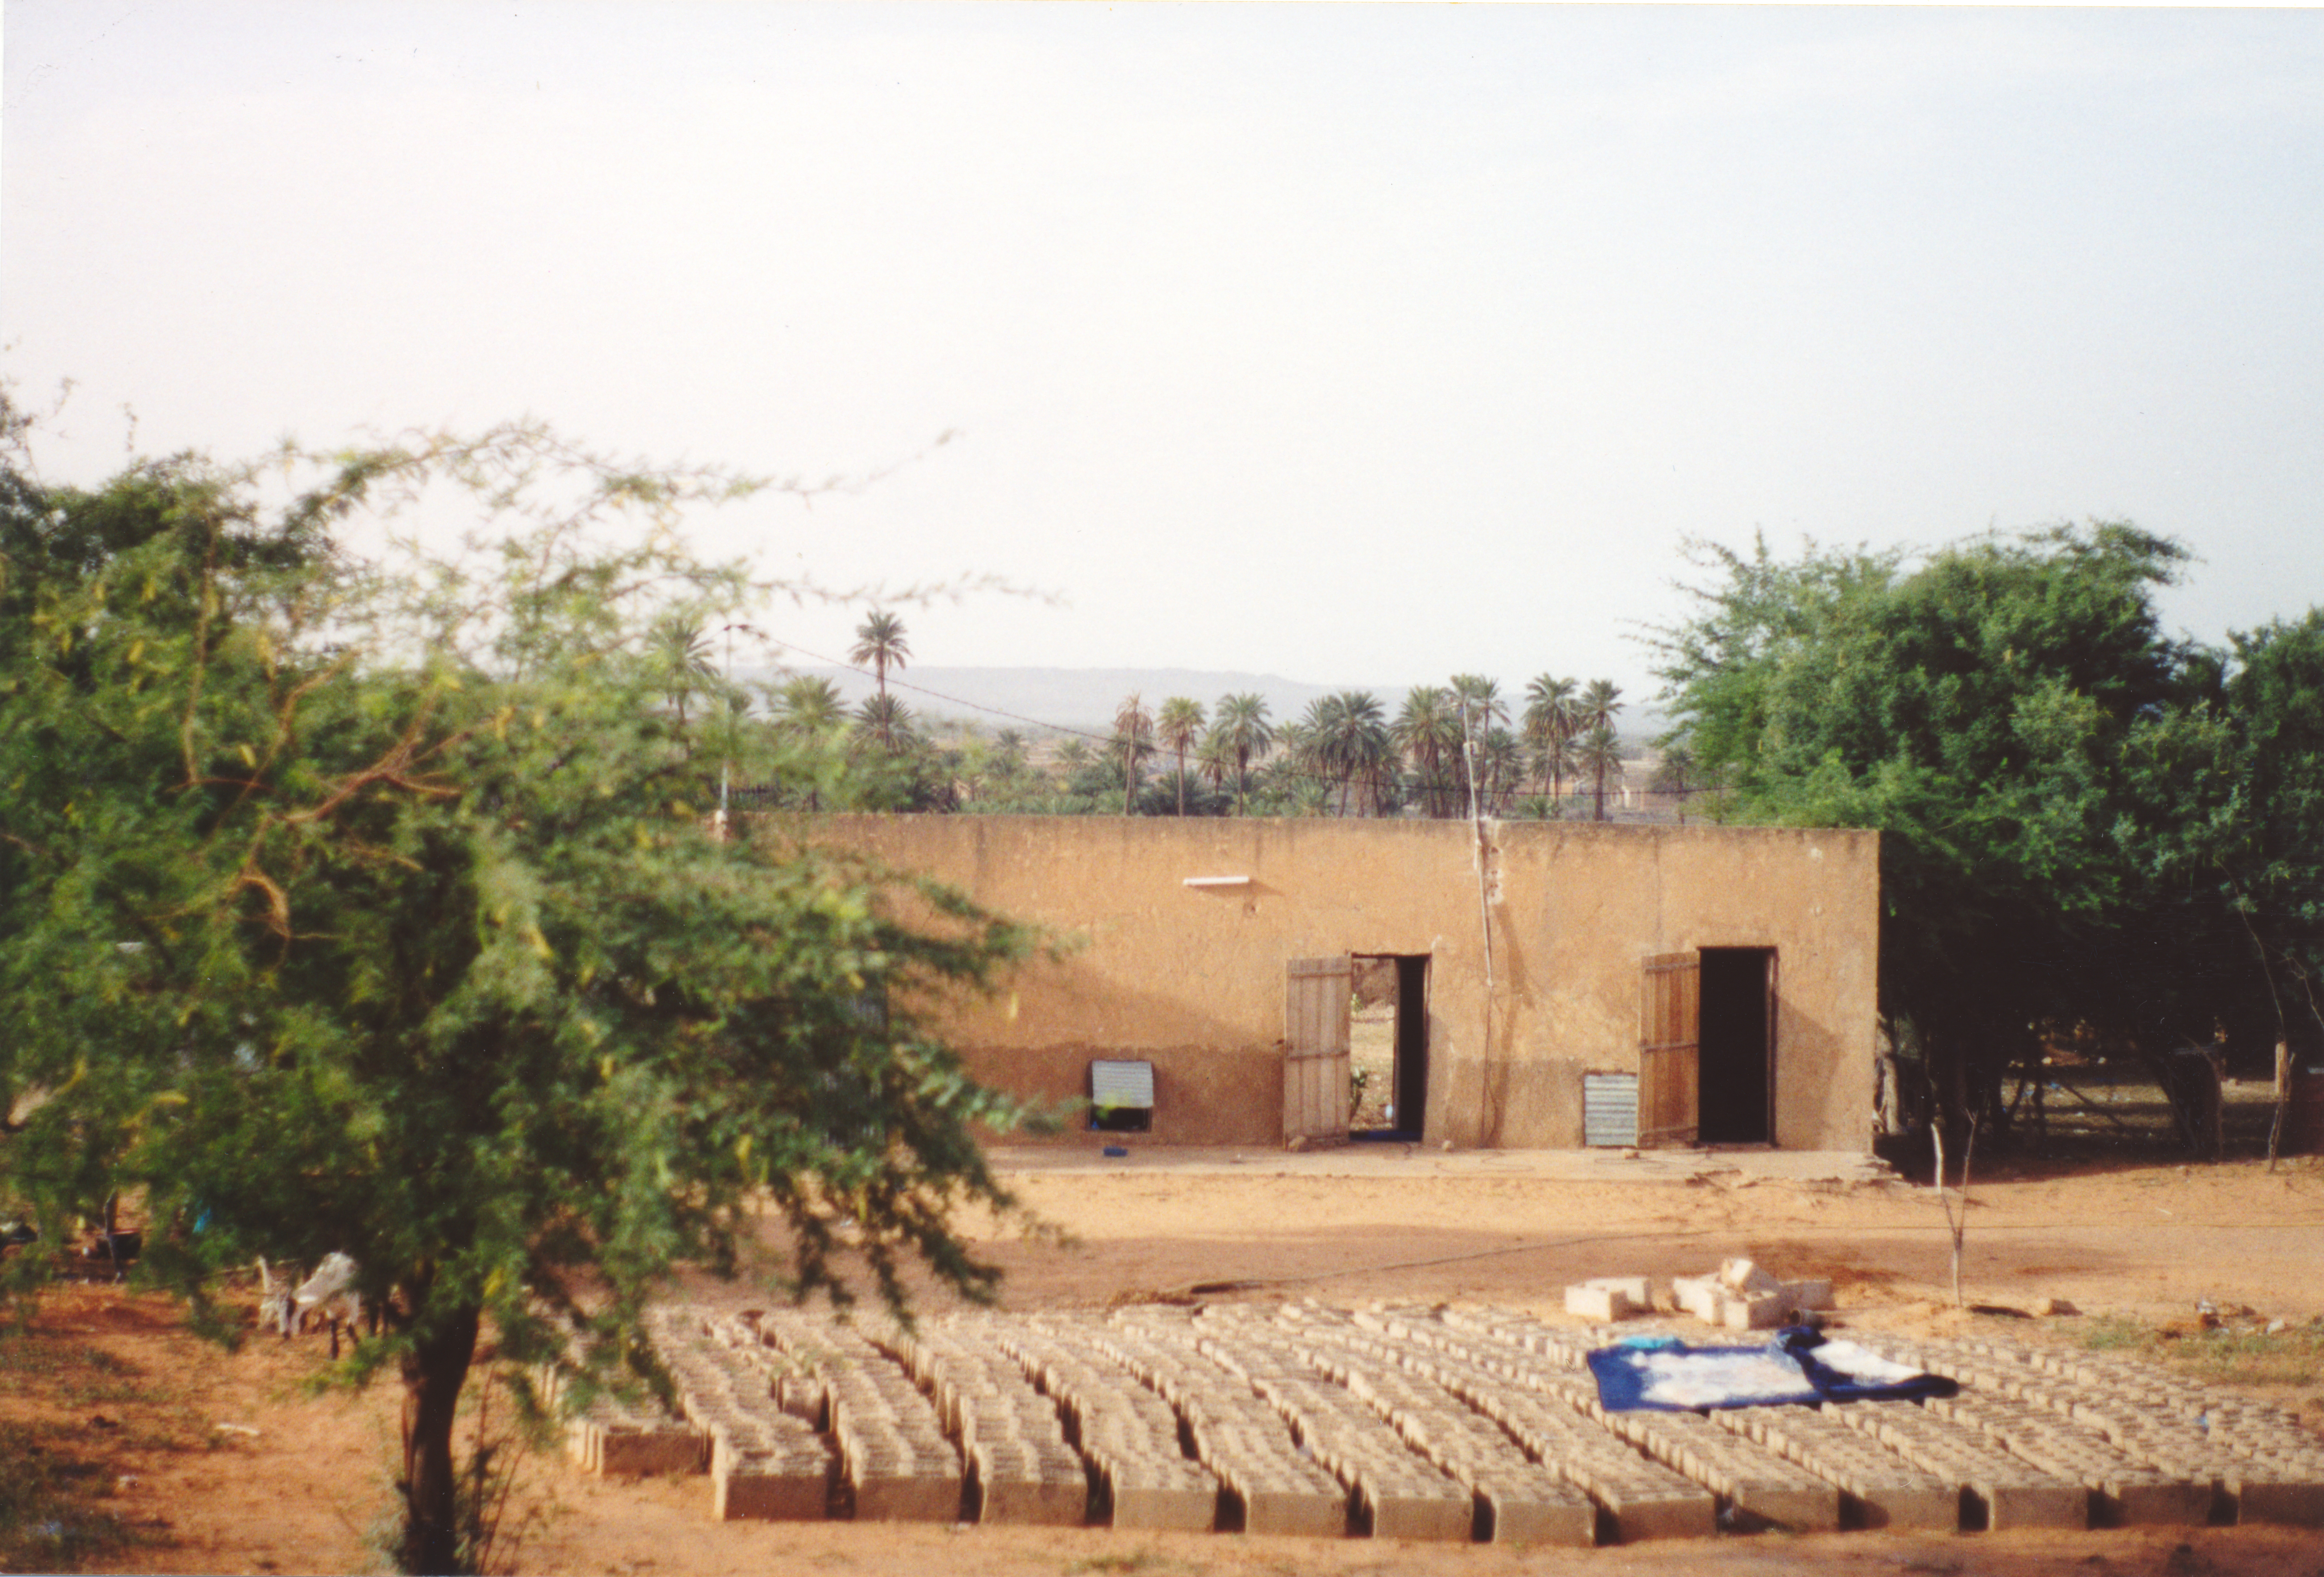 View of a mud-brick building in an arid landscape. In front are some small trees and rows of cinder blocks drying in the sun. Behind the building are some date palms. On the horizon, a small mountain or plateau.